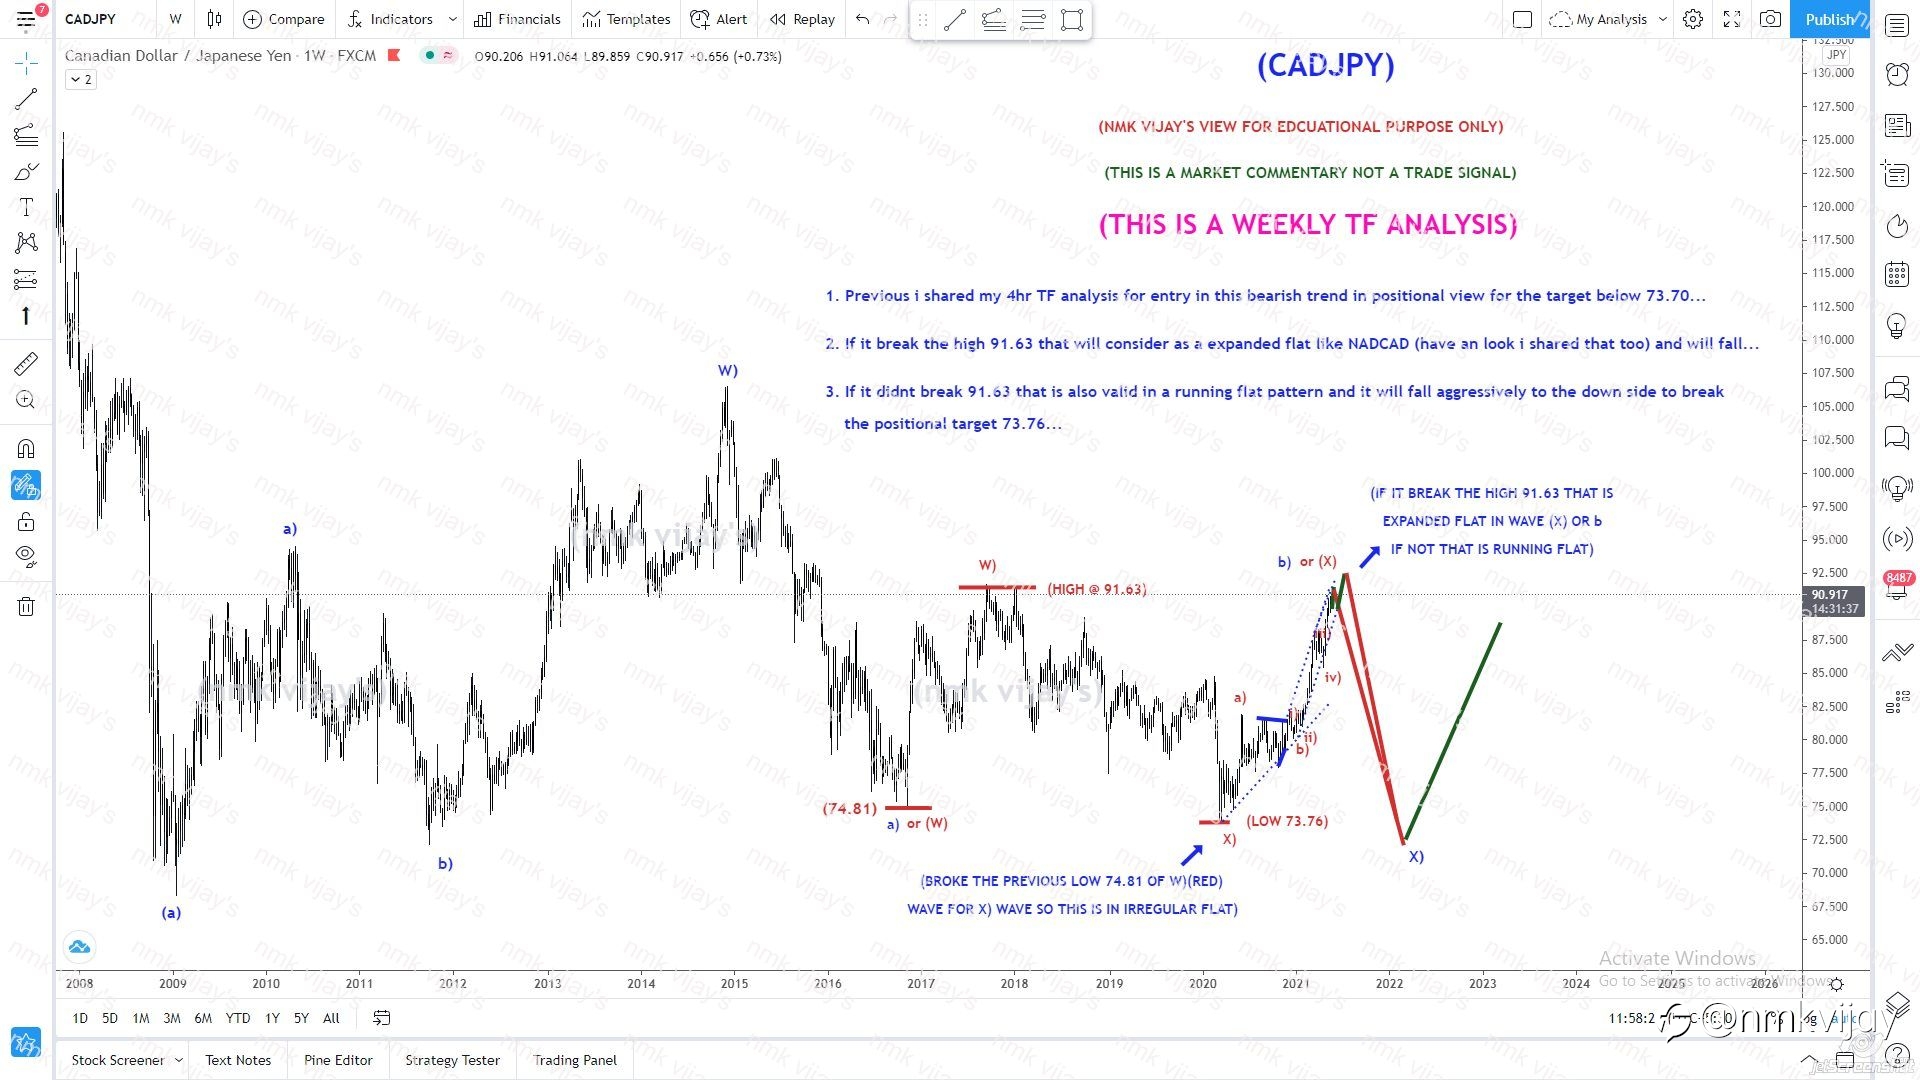 CADJPY-Weekly TF analysis and path to trade...